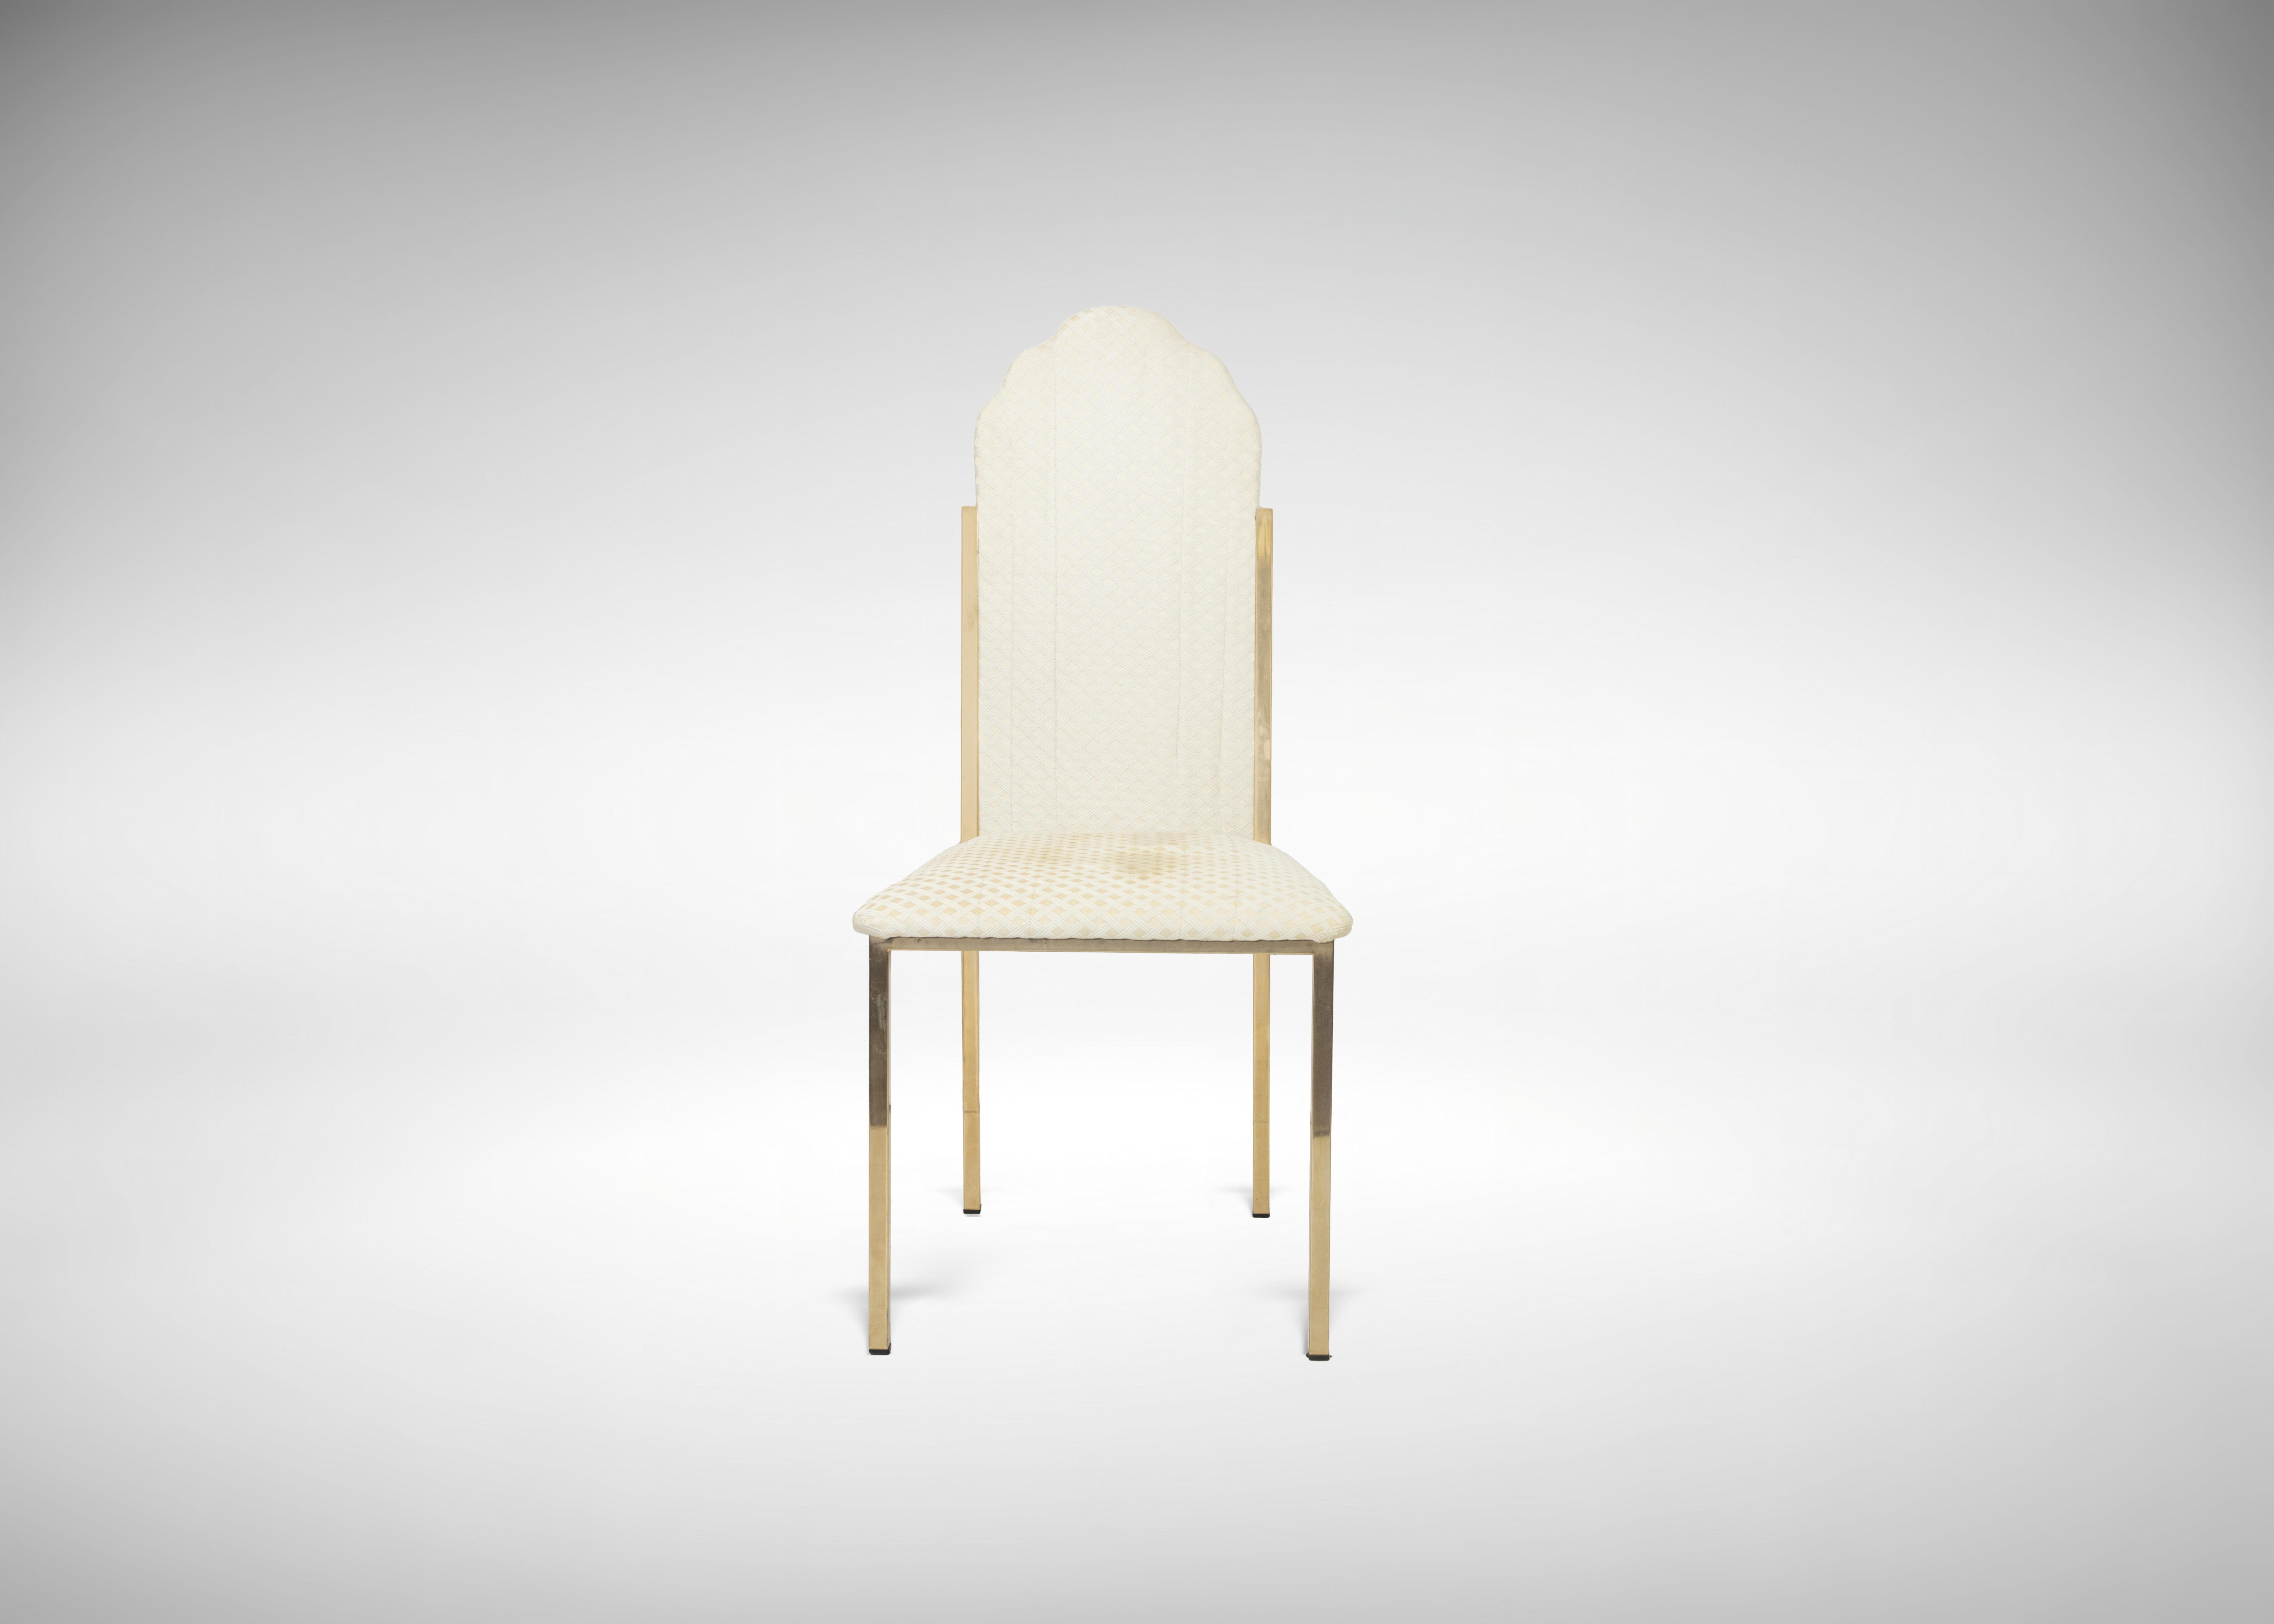 Alain Delon for Maison Jansen, 8 AD 026 chairs, 1970s.

Structure in gilded metal, seat and back in fabric, bear label with signature and monogram Alain Delon.

H cm 110x54x70 - H seat cm 47 (wear)

Ref. Sabot Original Catalog - Manzano (Udine),